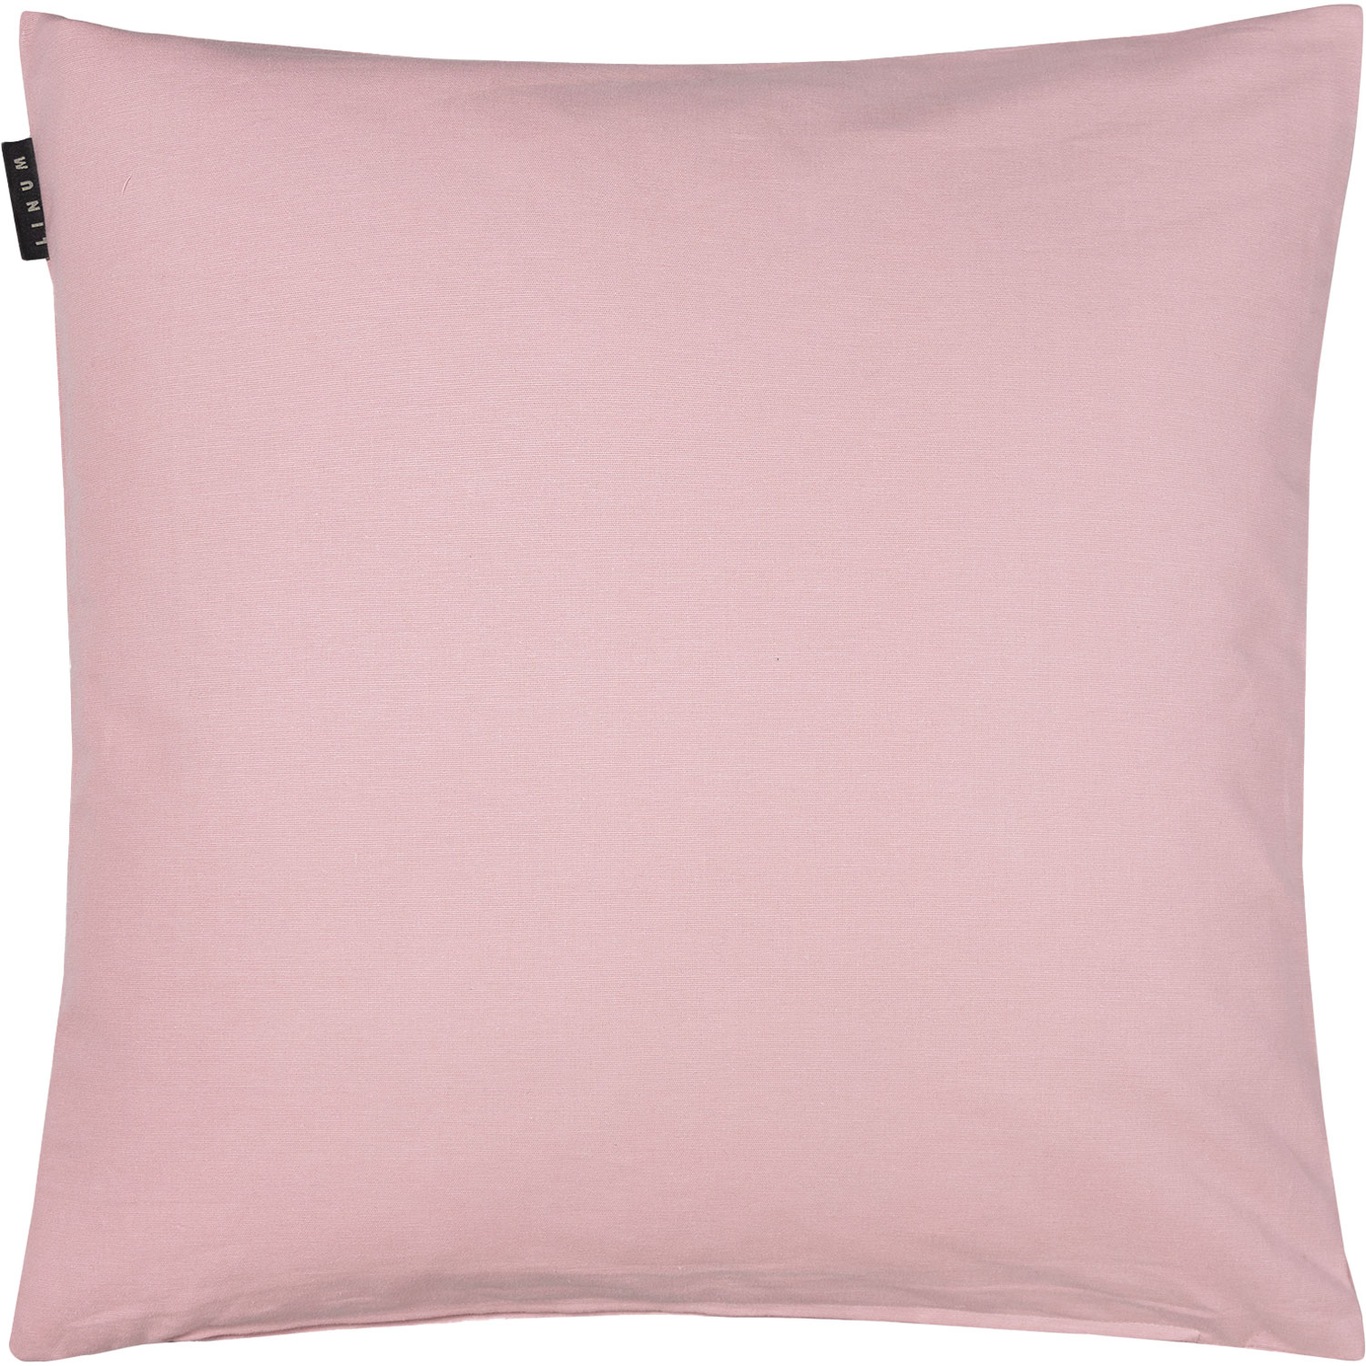 Annabell Kuddfodral 50x50 cm, Dusty Pink